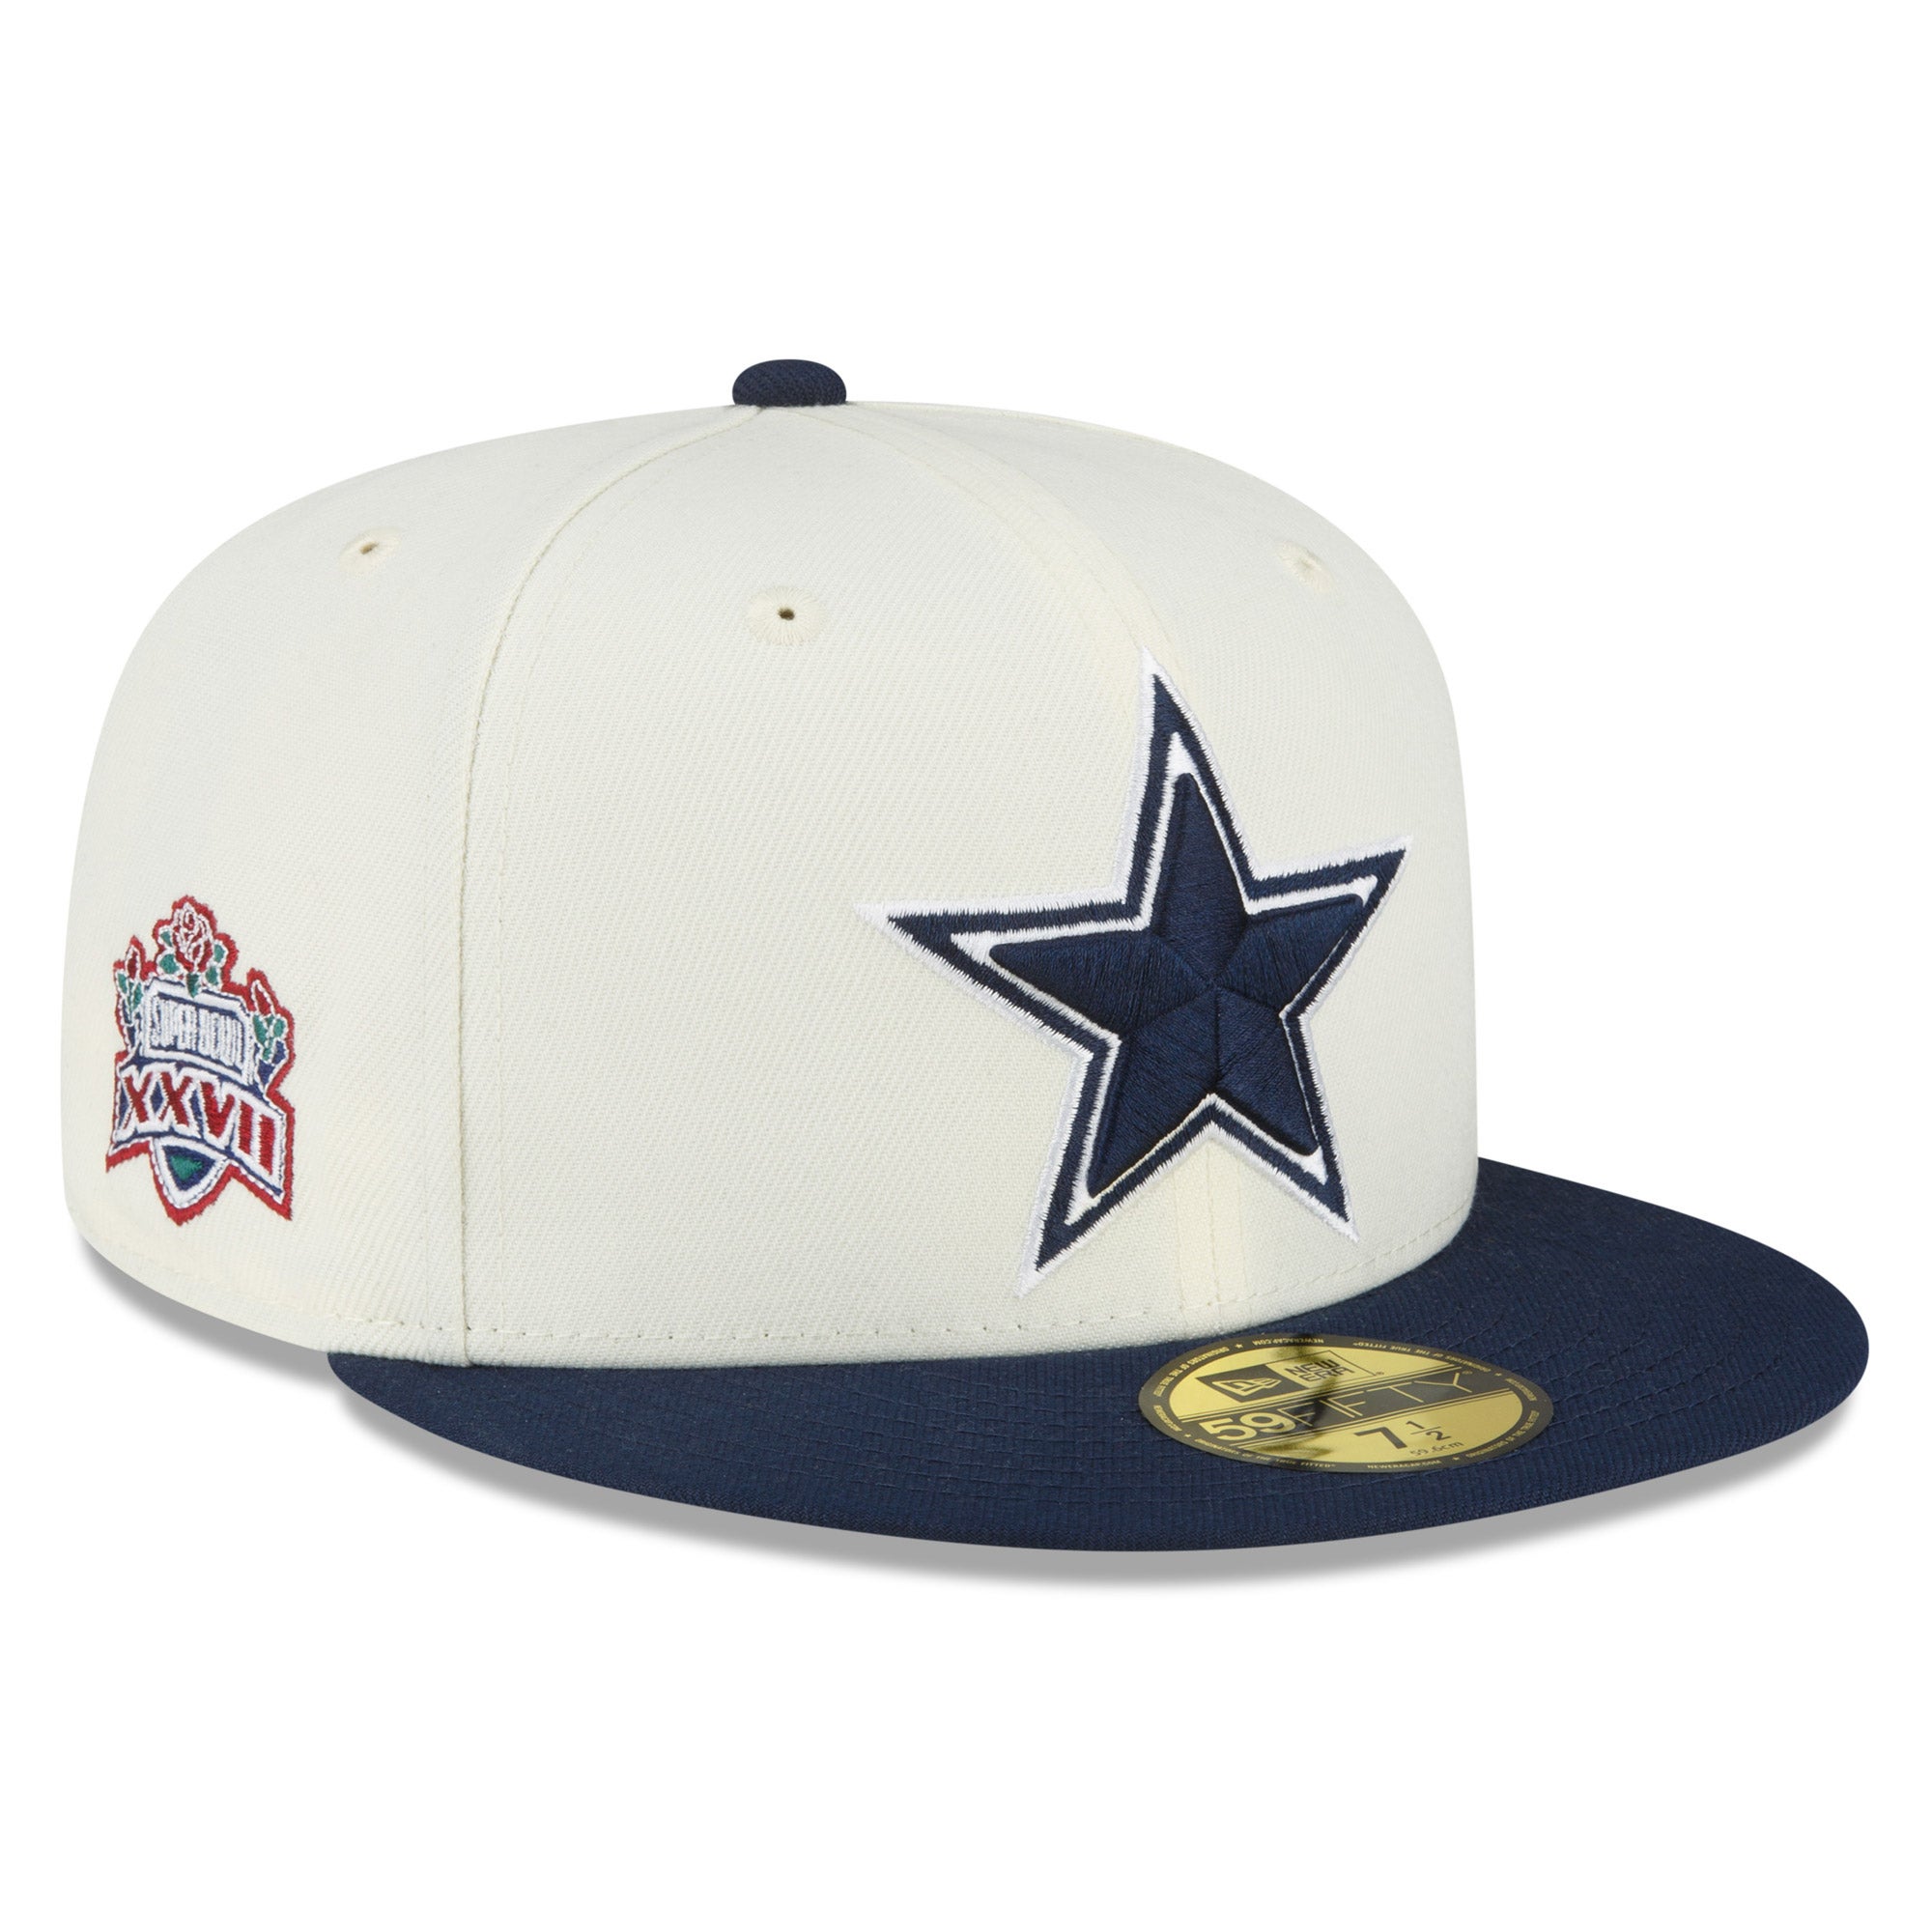 New Era Cowboys Retro 59FIFTY Fitted Hat